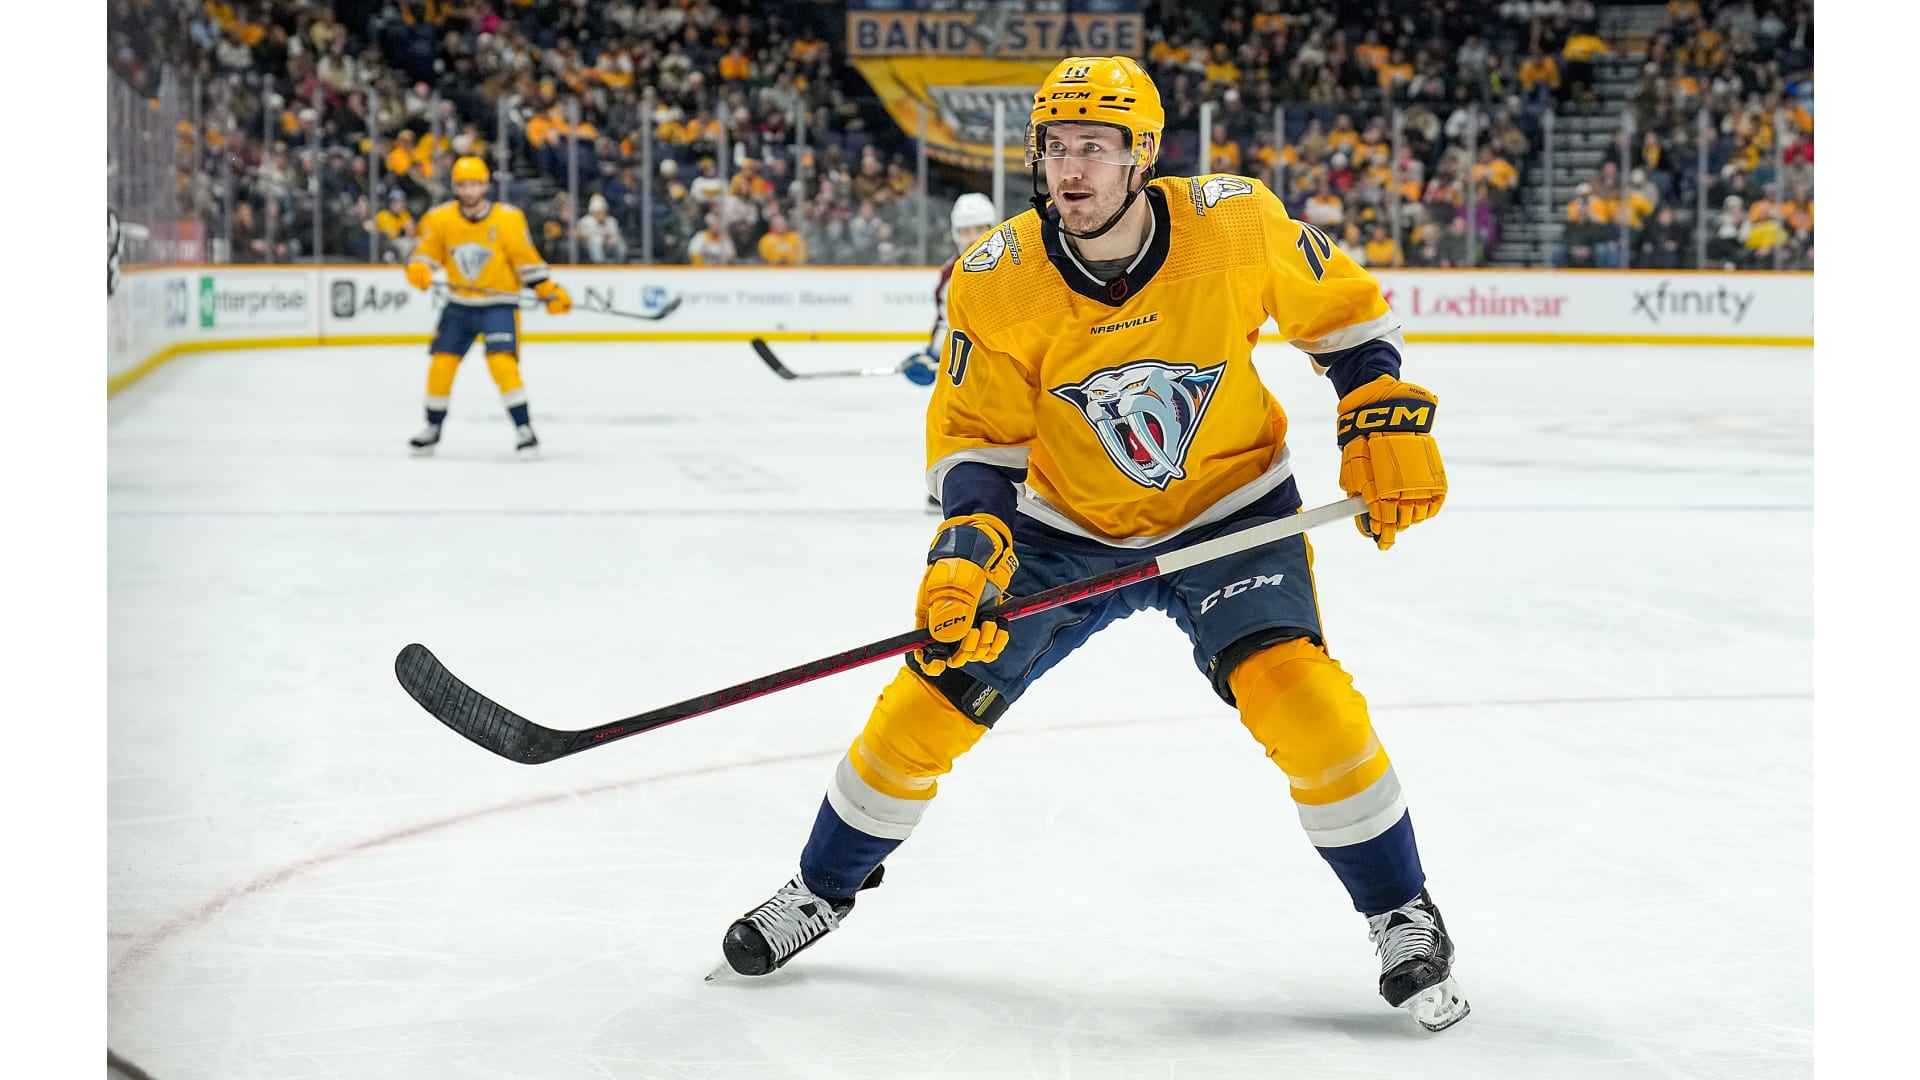 Colton Sissons Hockey Stats and Profile at